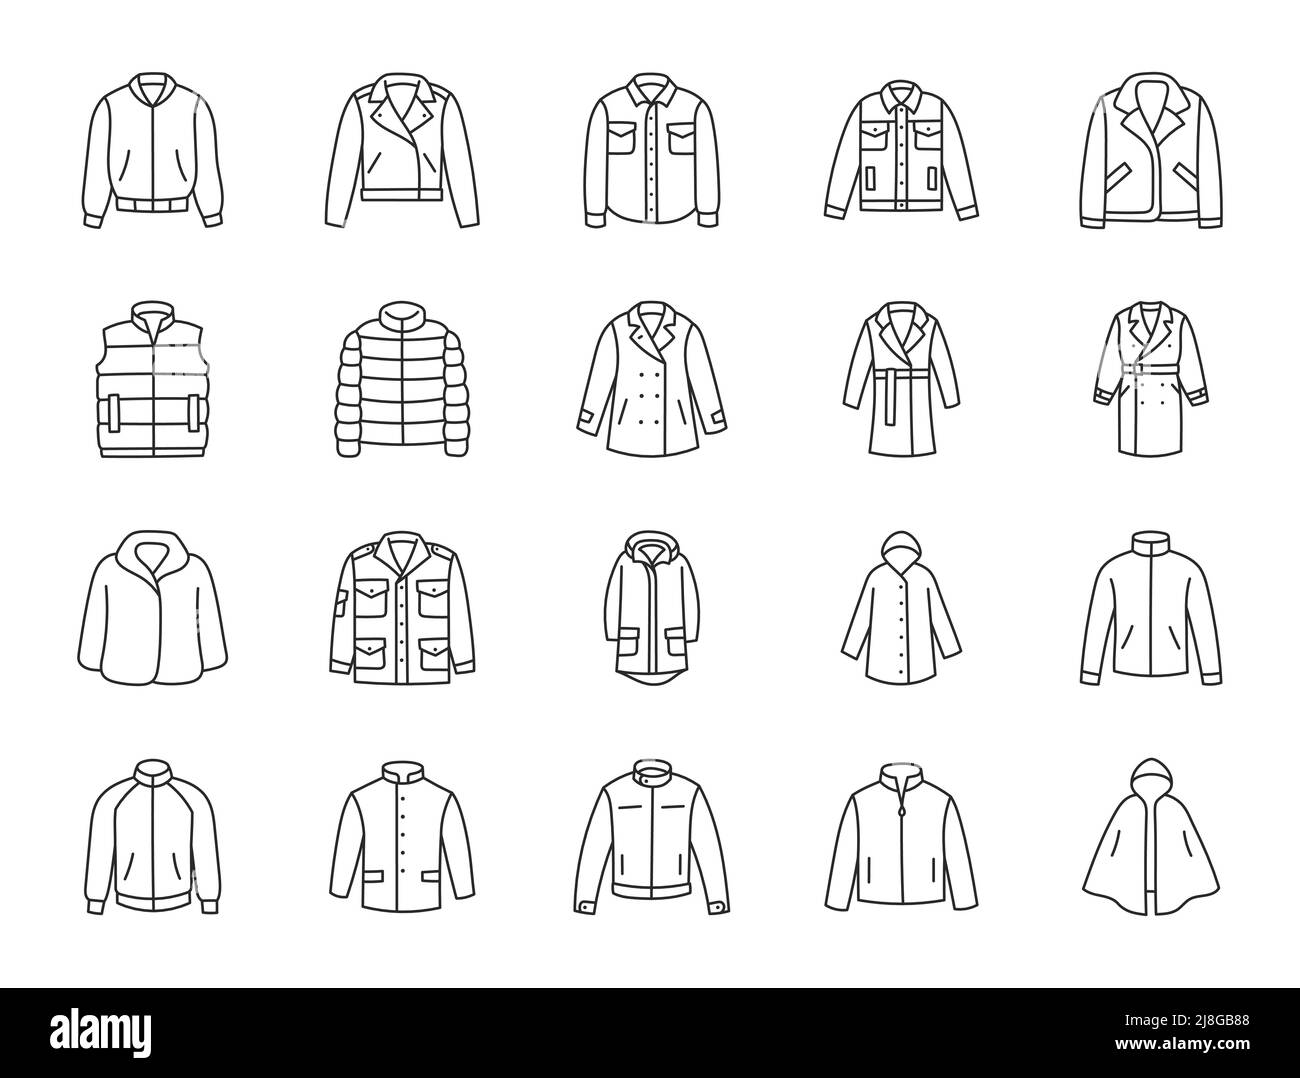 Outerwear clothes doodle illustration including icons - waterproof raincoat, windbreaker, peacoat, parka, wind cheater, tracksuit, motorbike jacket Stock Vector